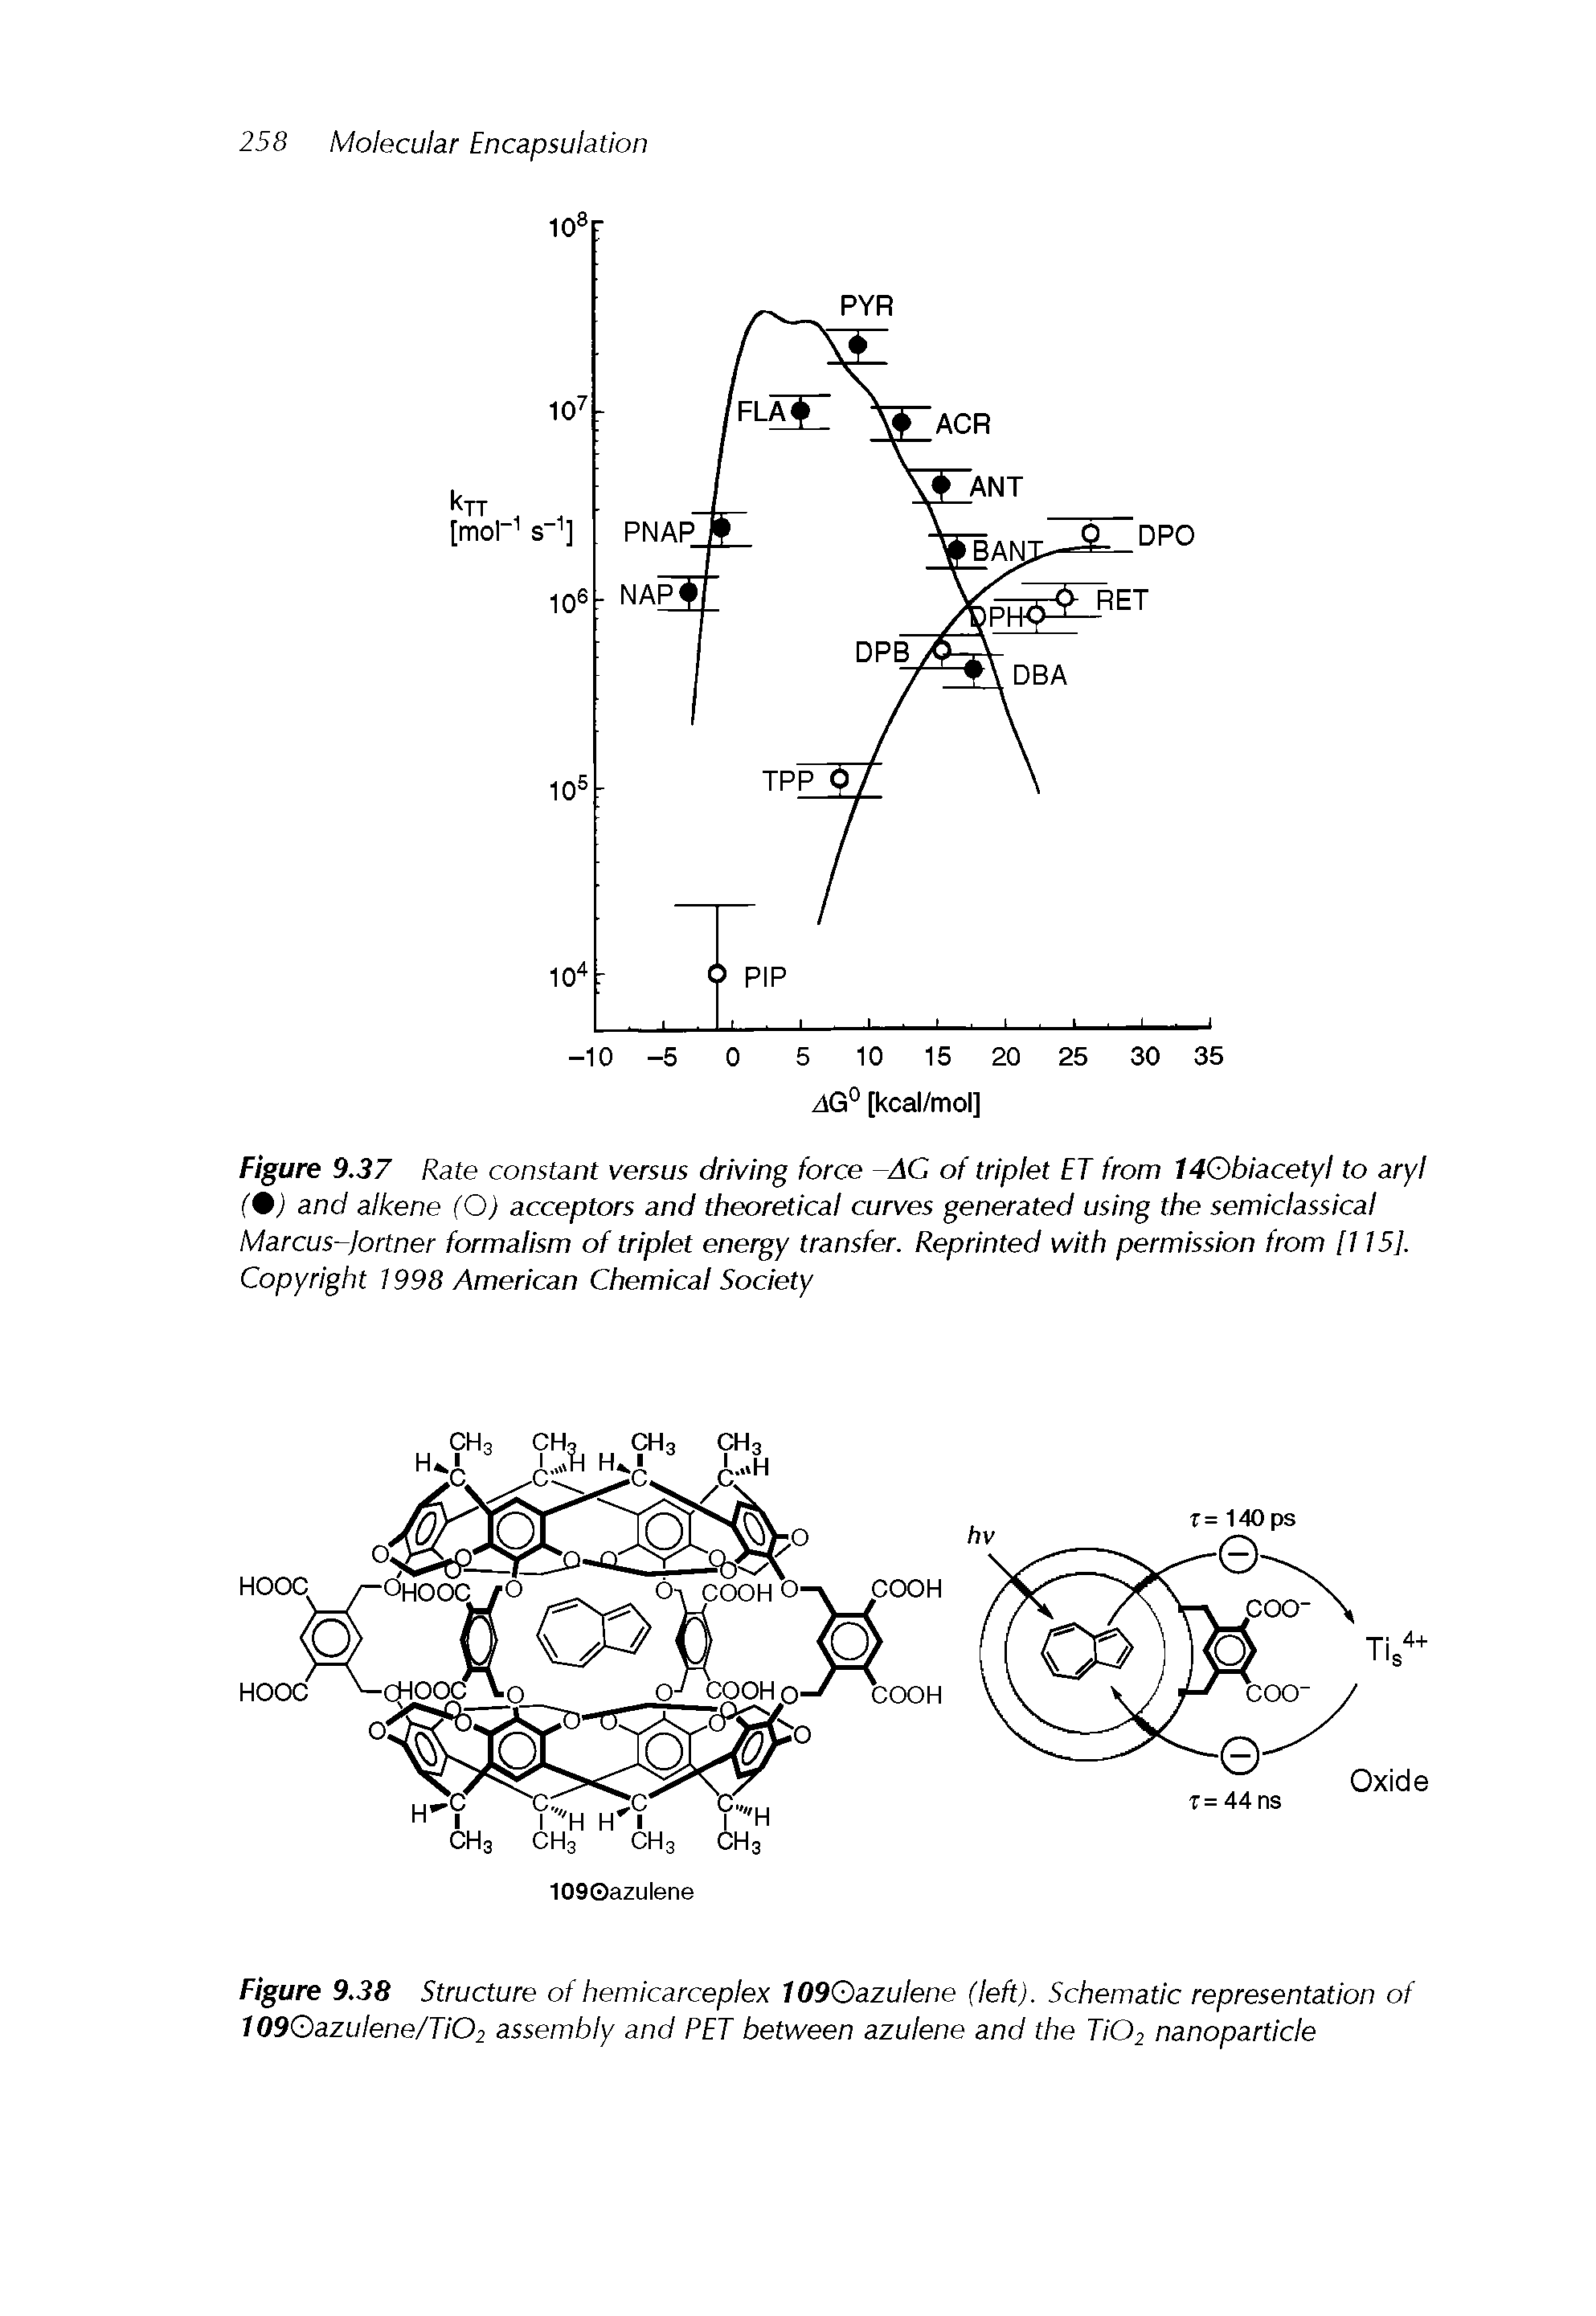 Figure 9.37 Rate constant versus driving force AC of triplet ET from 140biacetyl to aryl (%) and alkene (O) acceptors and theoretical curves generated using the semiclassical Marcus-jortner formalism of triplet energy transfer. Reprinted with permission from [115]. Copyright 1998 American Chemical Society...